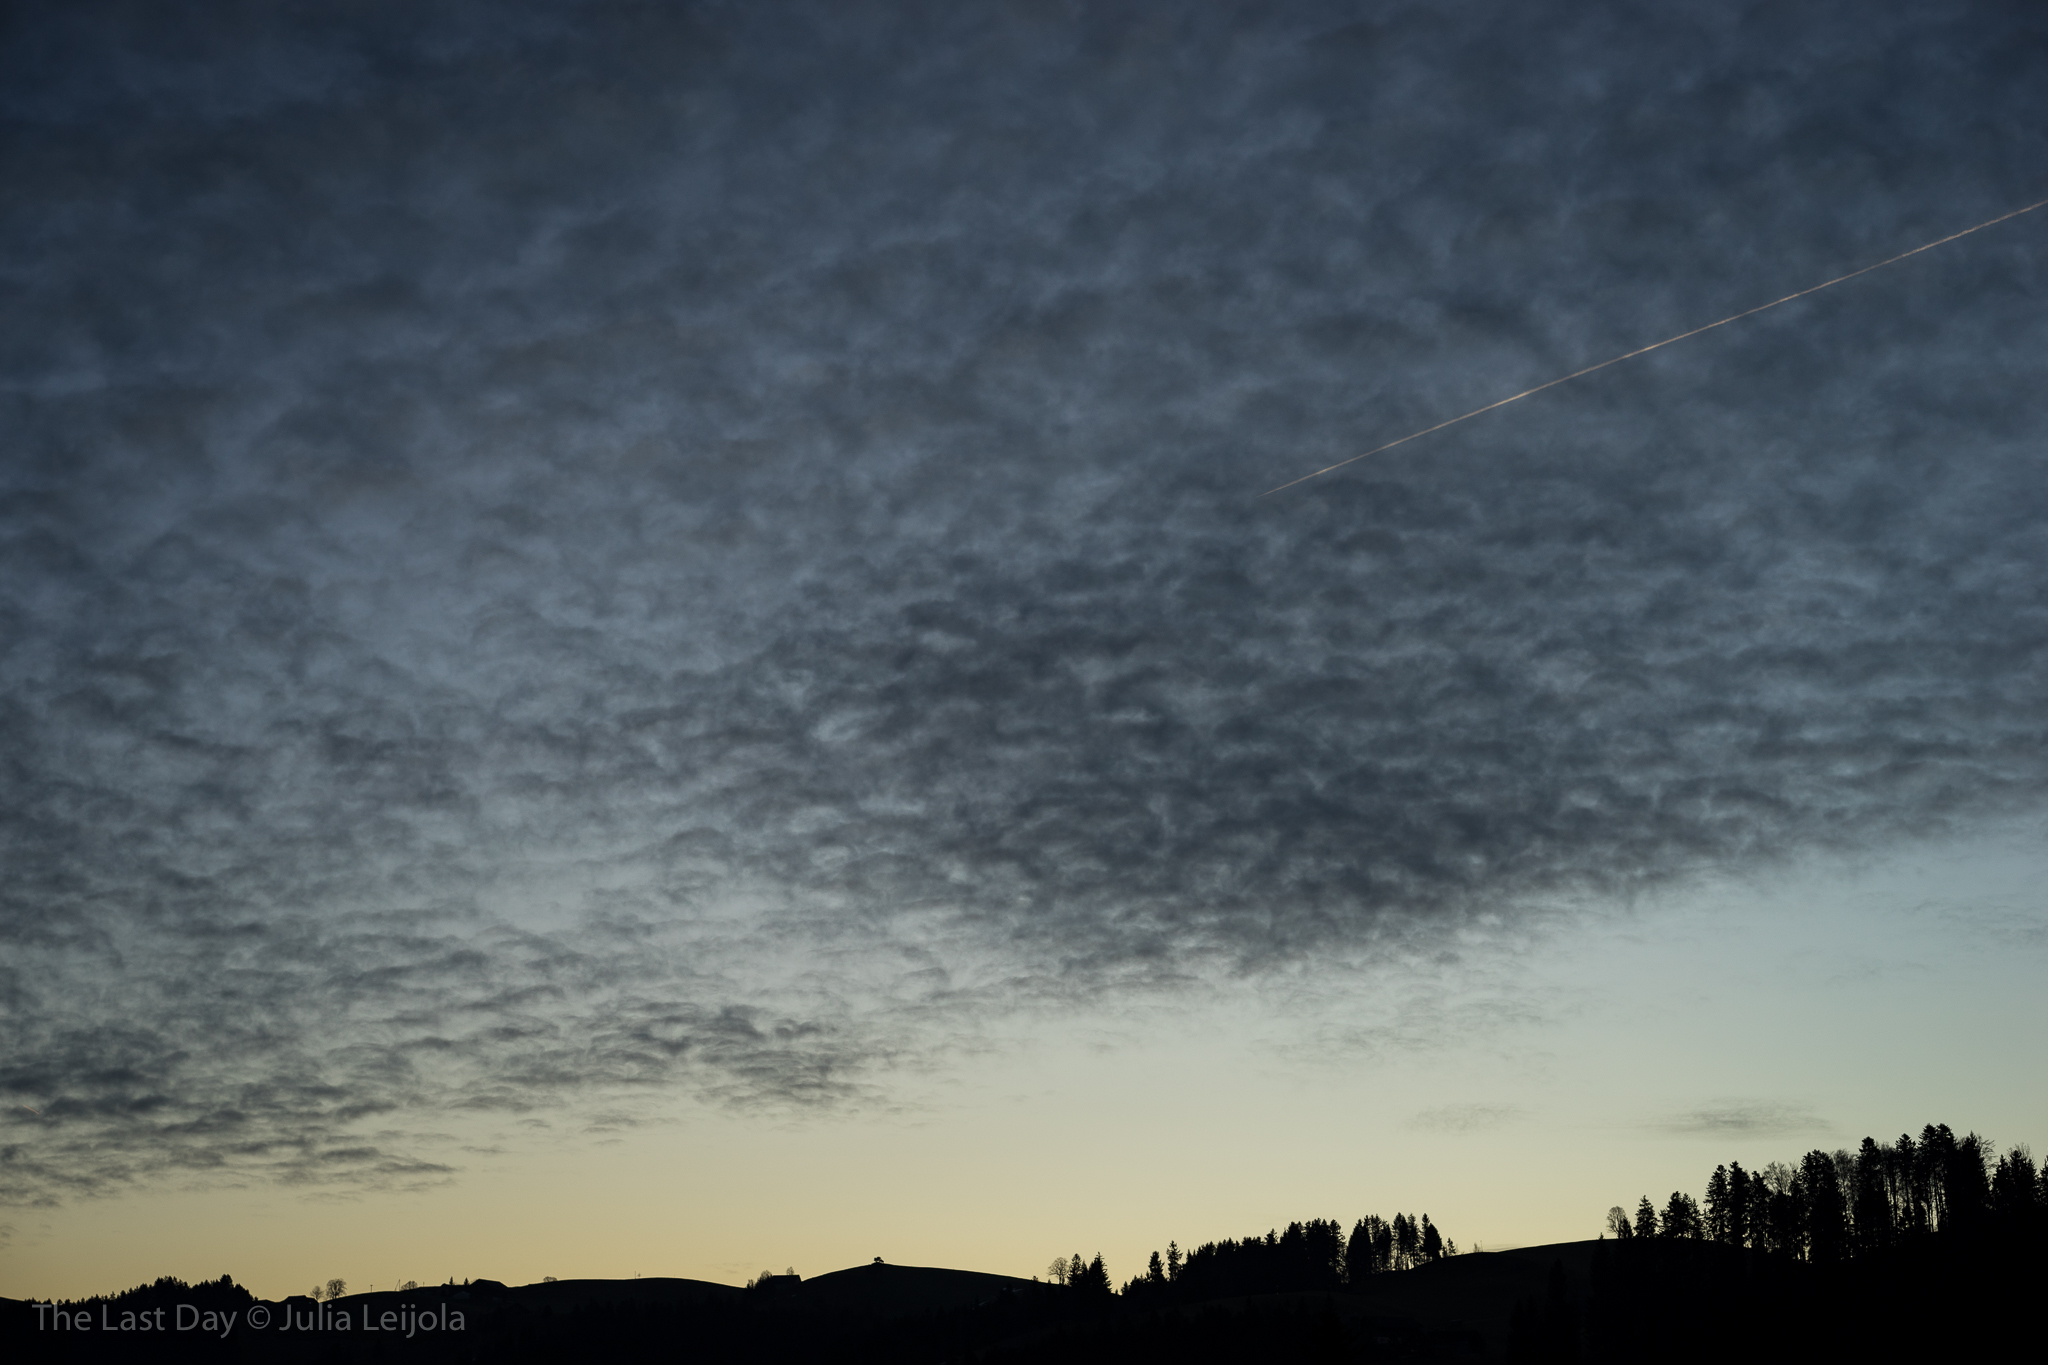 break of dawn over Dicken (SG, Switzerland): black silhouette of hills and a wide sky with a thin layer of clouds - a contrail lit up by the sun pierces the sky.